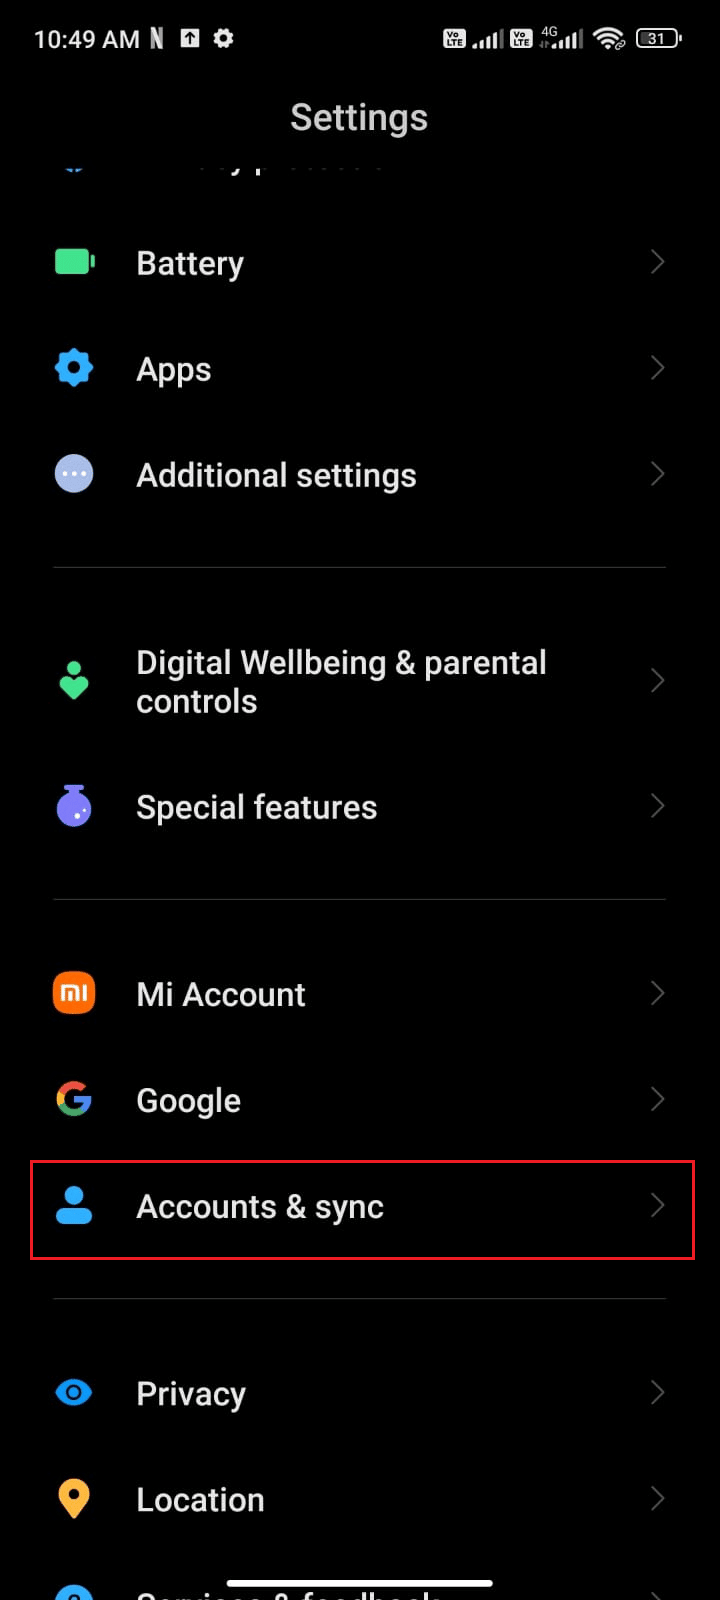 Scroll down the Settings screen and tap Accounts and sync. Fix Google Play Store Error Checking for Updates